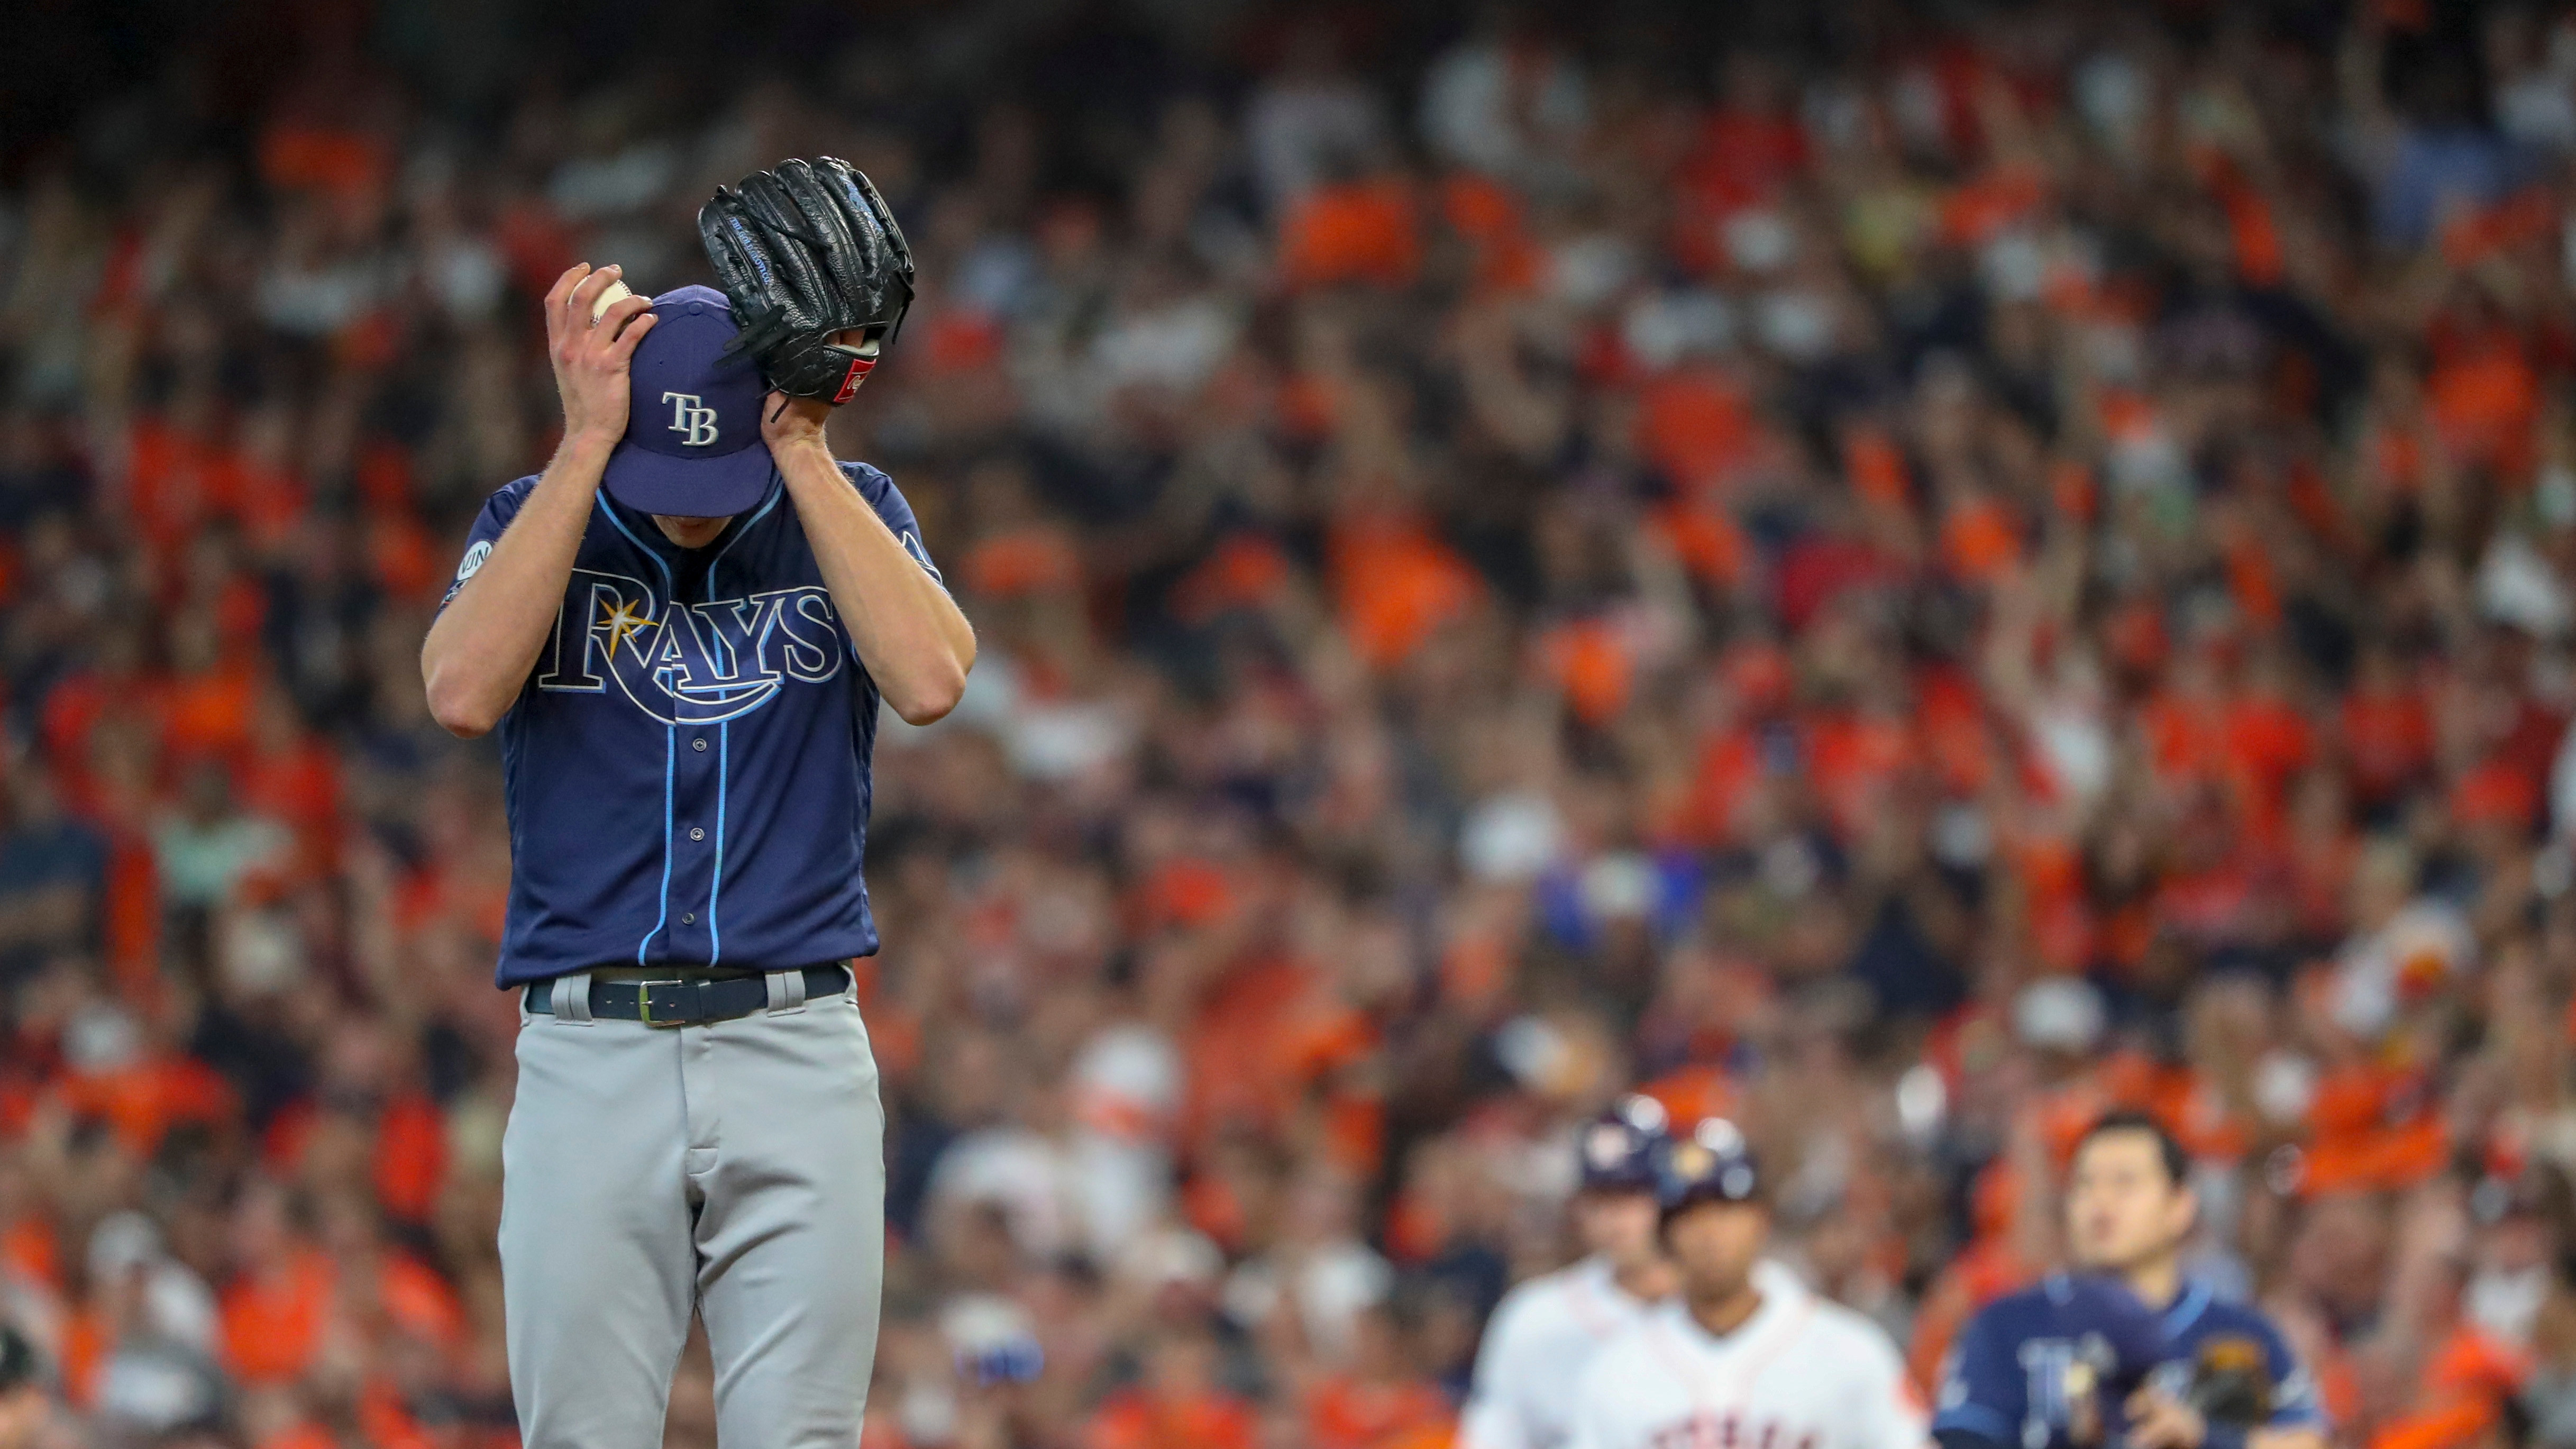 2019 MLB playoffs, World Series picks: Can Houston Astros be stopped?